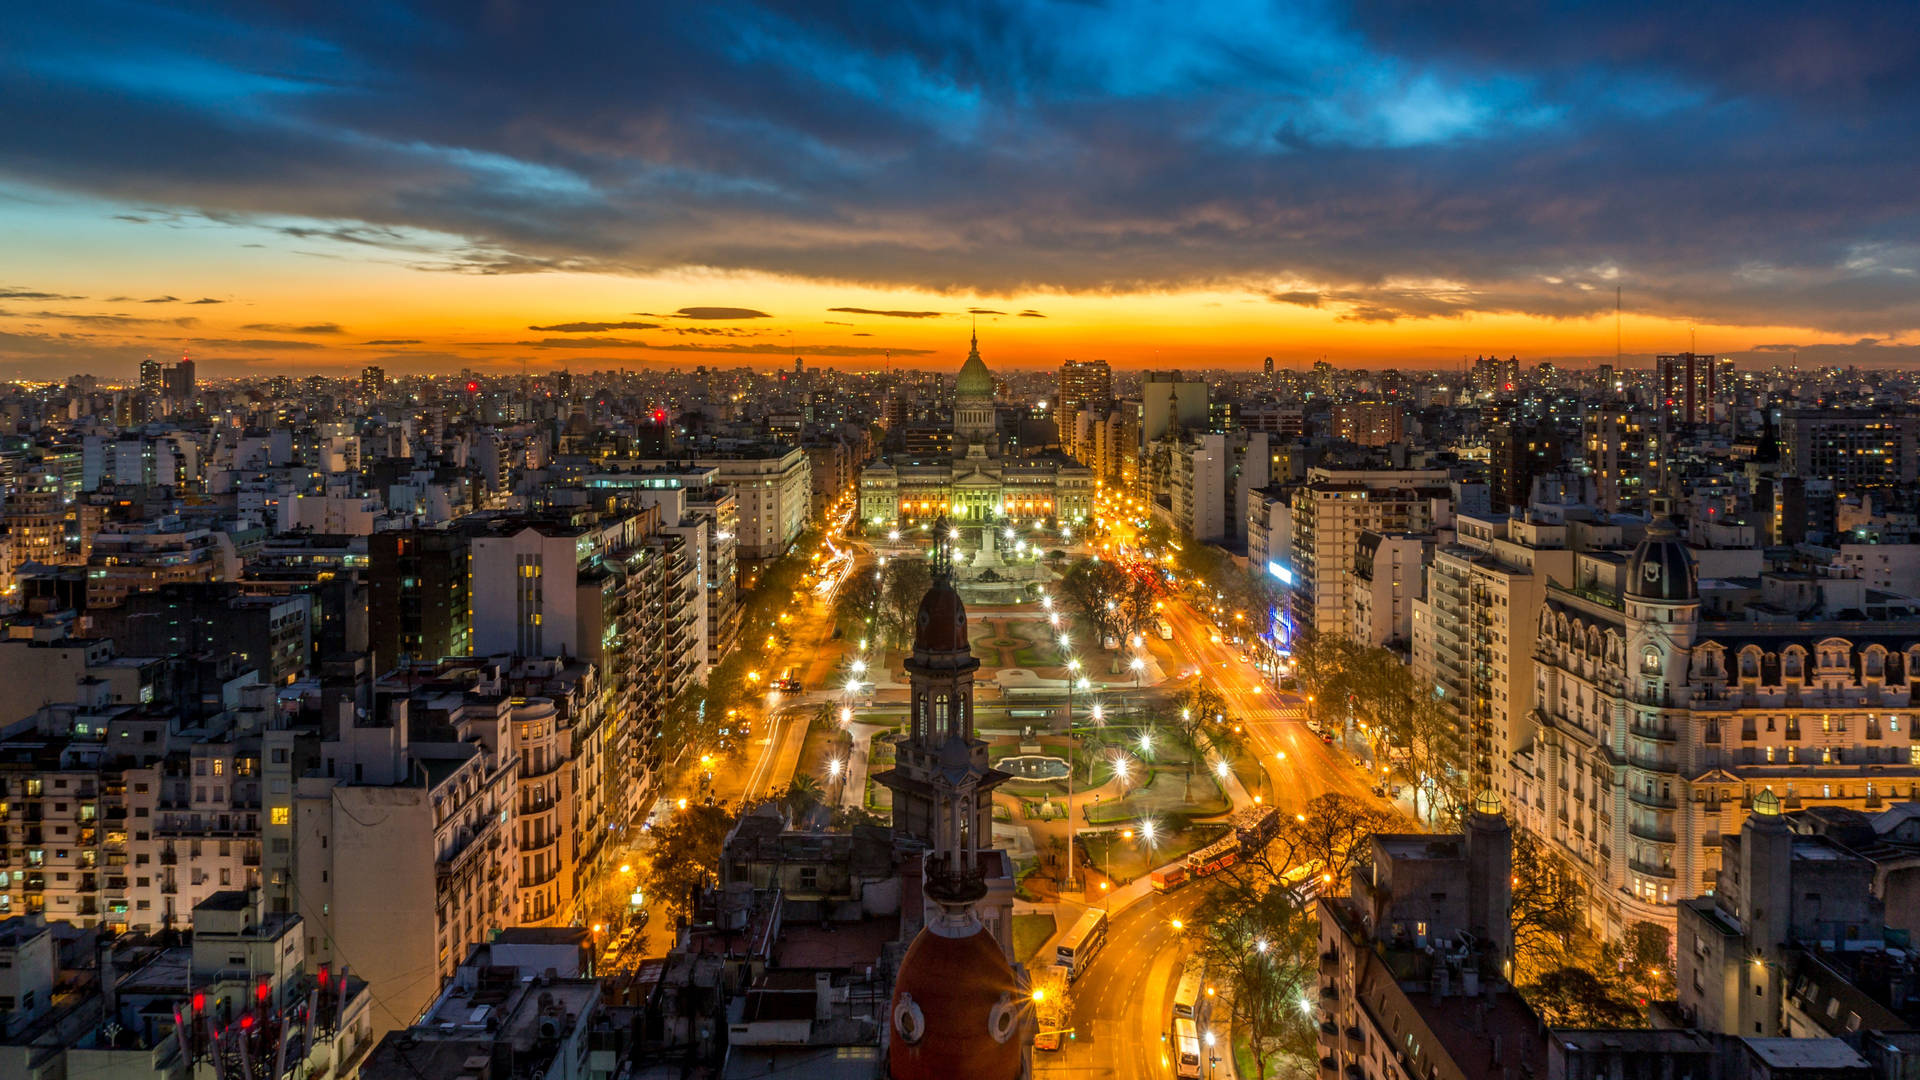 Dusk descends on the beautiful Buenos Aires cityscape. Wallpaper